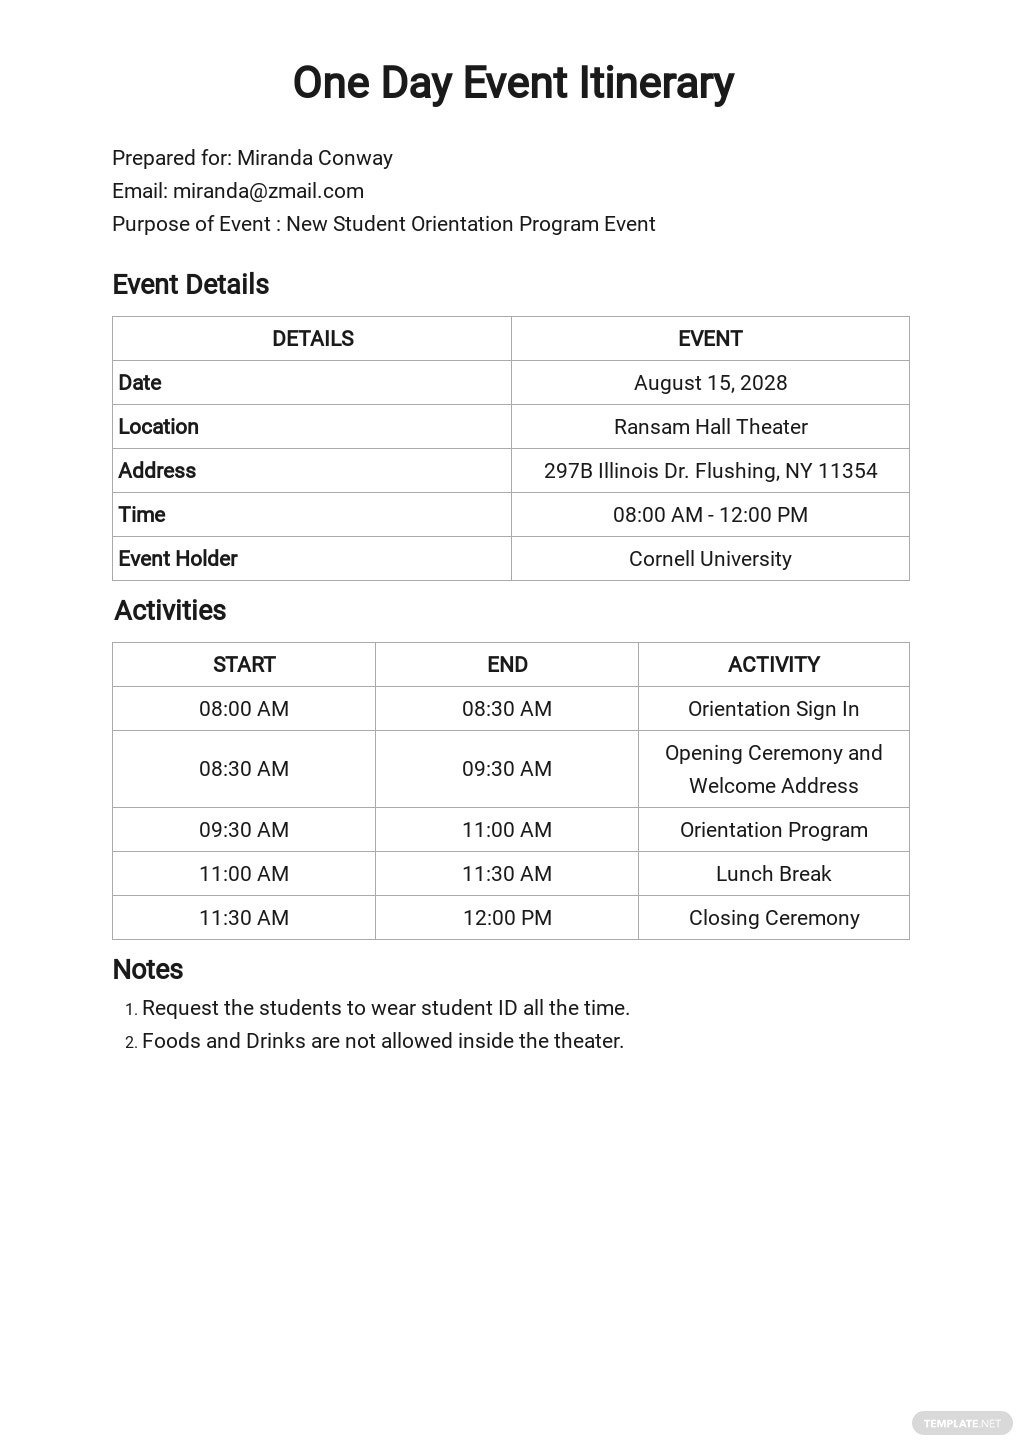 Free One Day Event Itinerary Template ?width=480